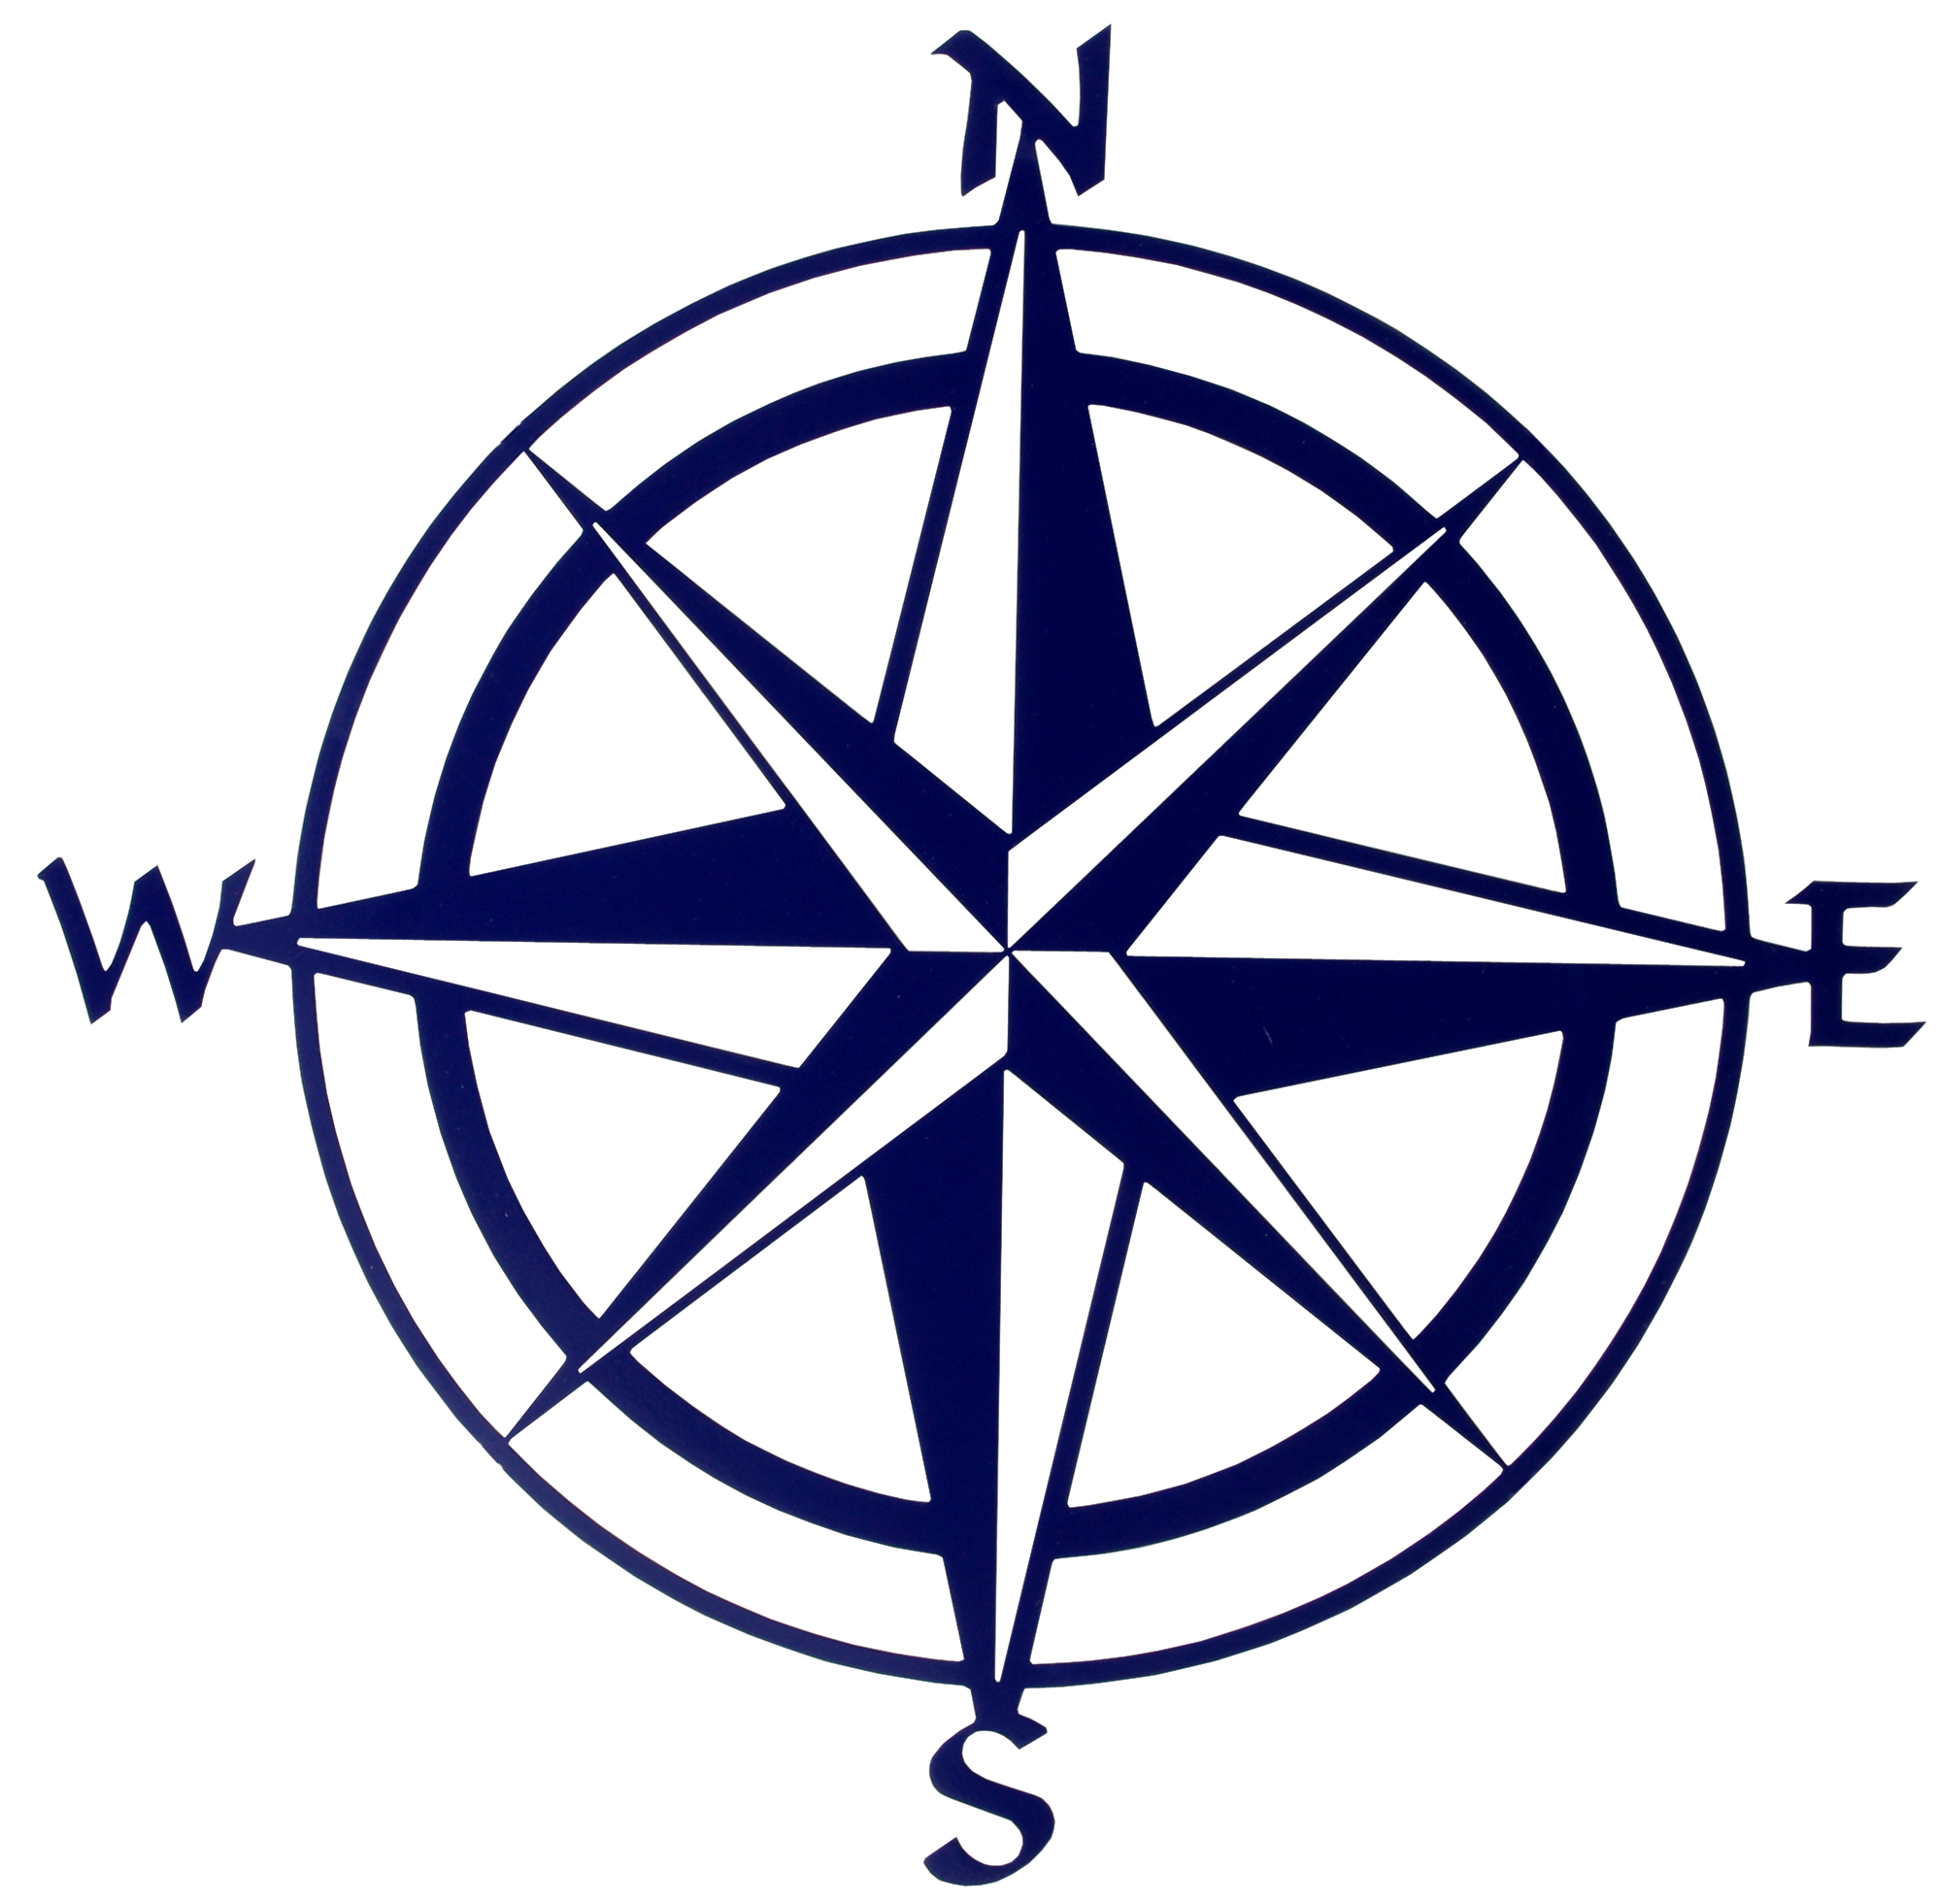 Compass clip art to download